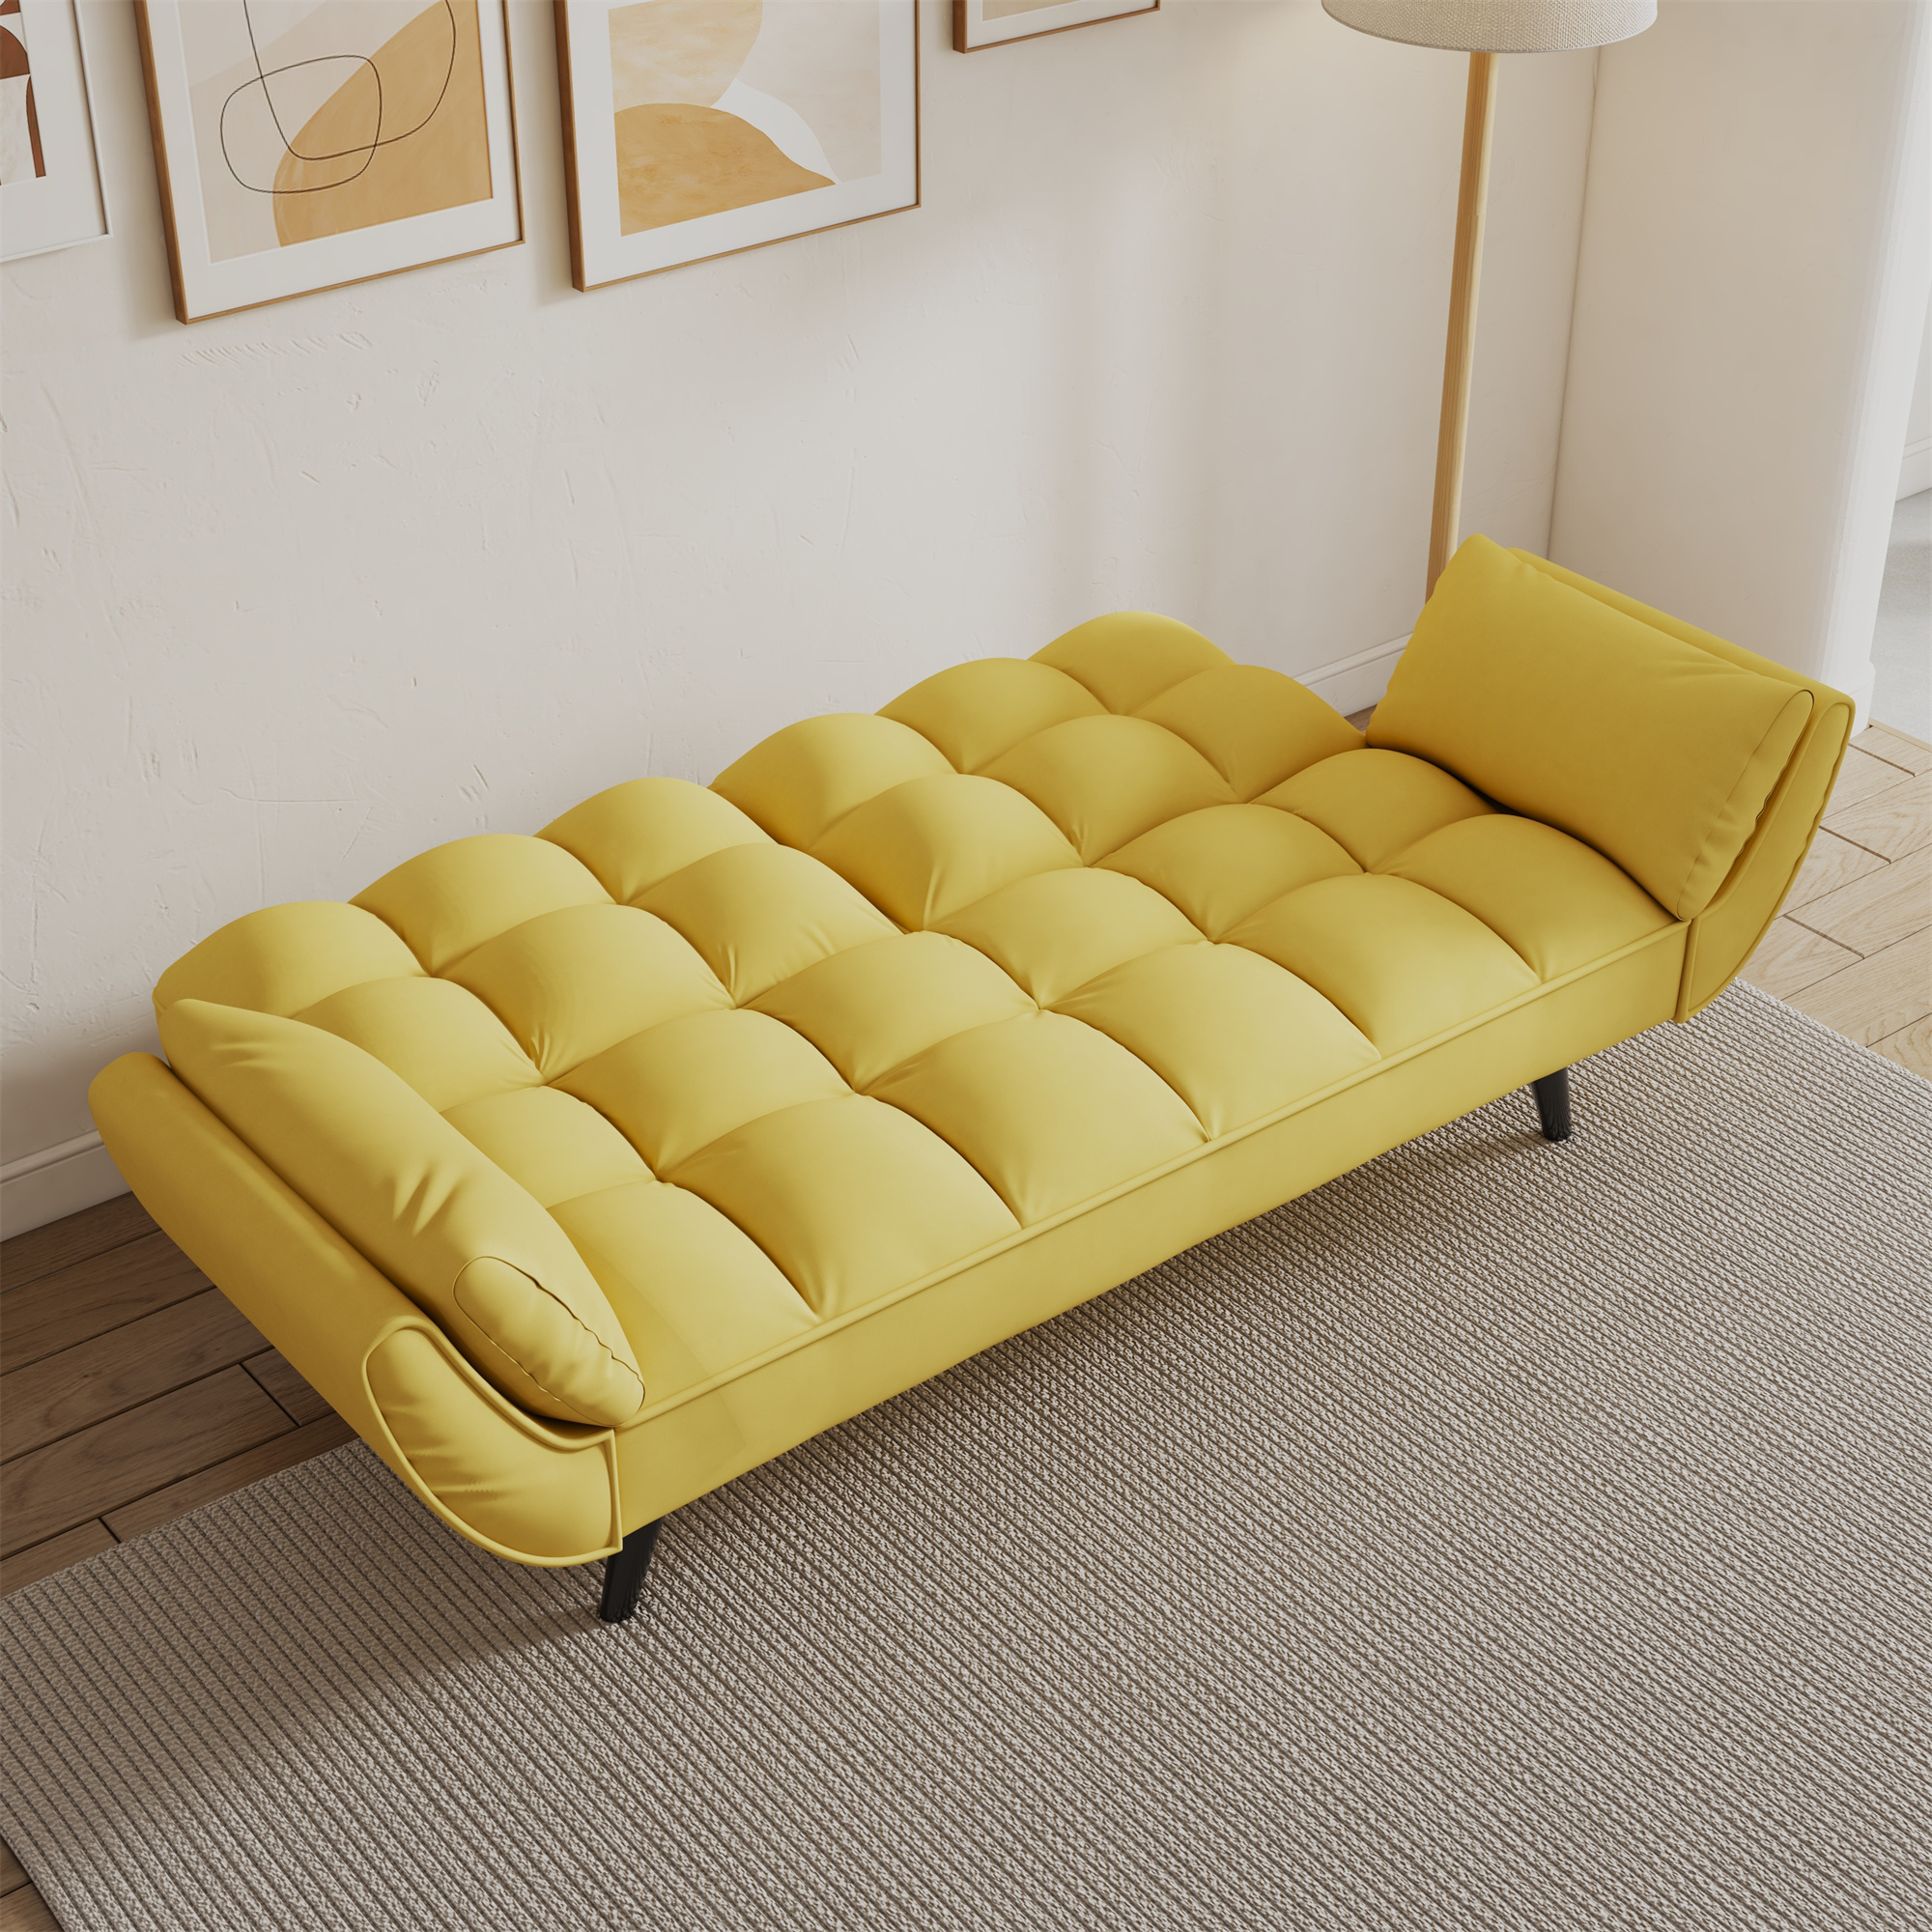 Aukfa 75" Flared Arm Futon Convertible Sofa Bed, Curved Sleeper Sofa for Home Office, Yellow - image 3 of 26